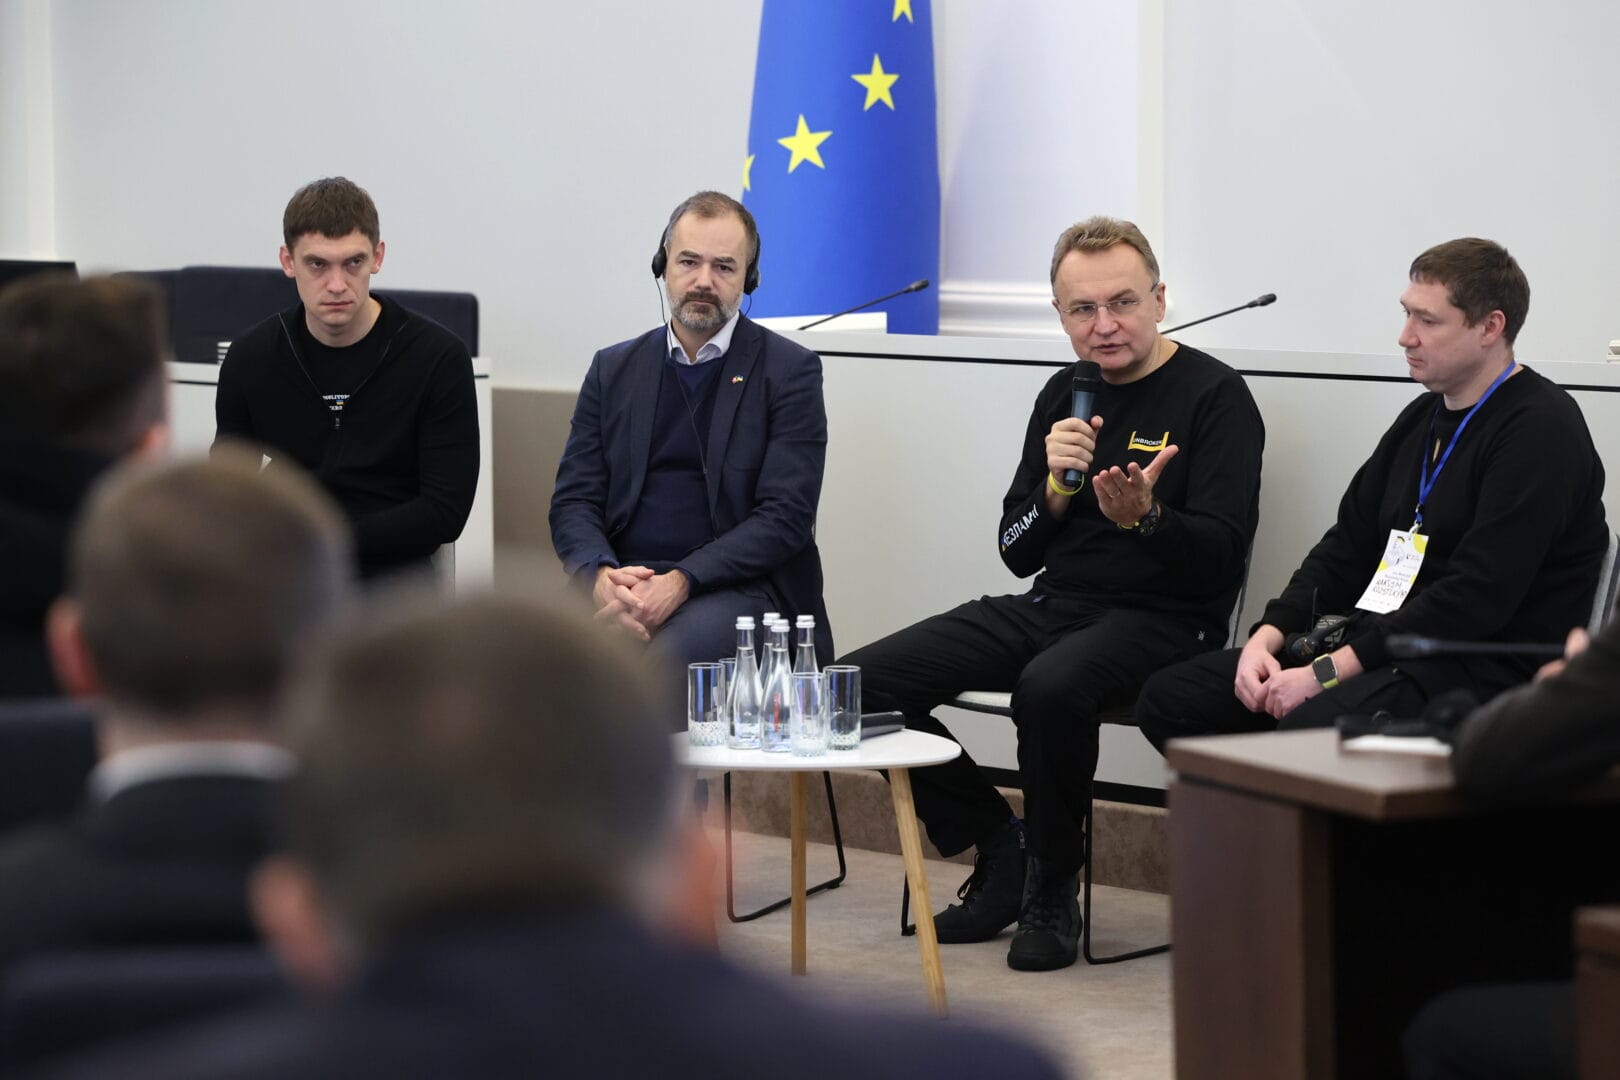 The mayors of Melitopol, Aarhus, Lviv, and the head of the Lviv Regional Military Administration during a panel at the forum.